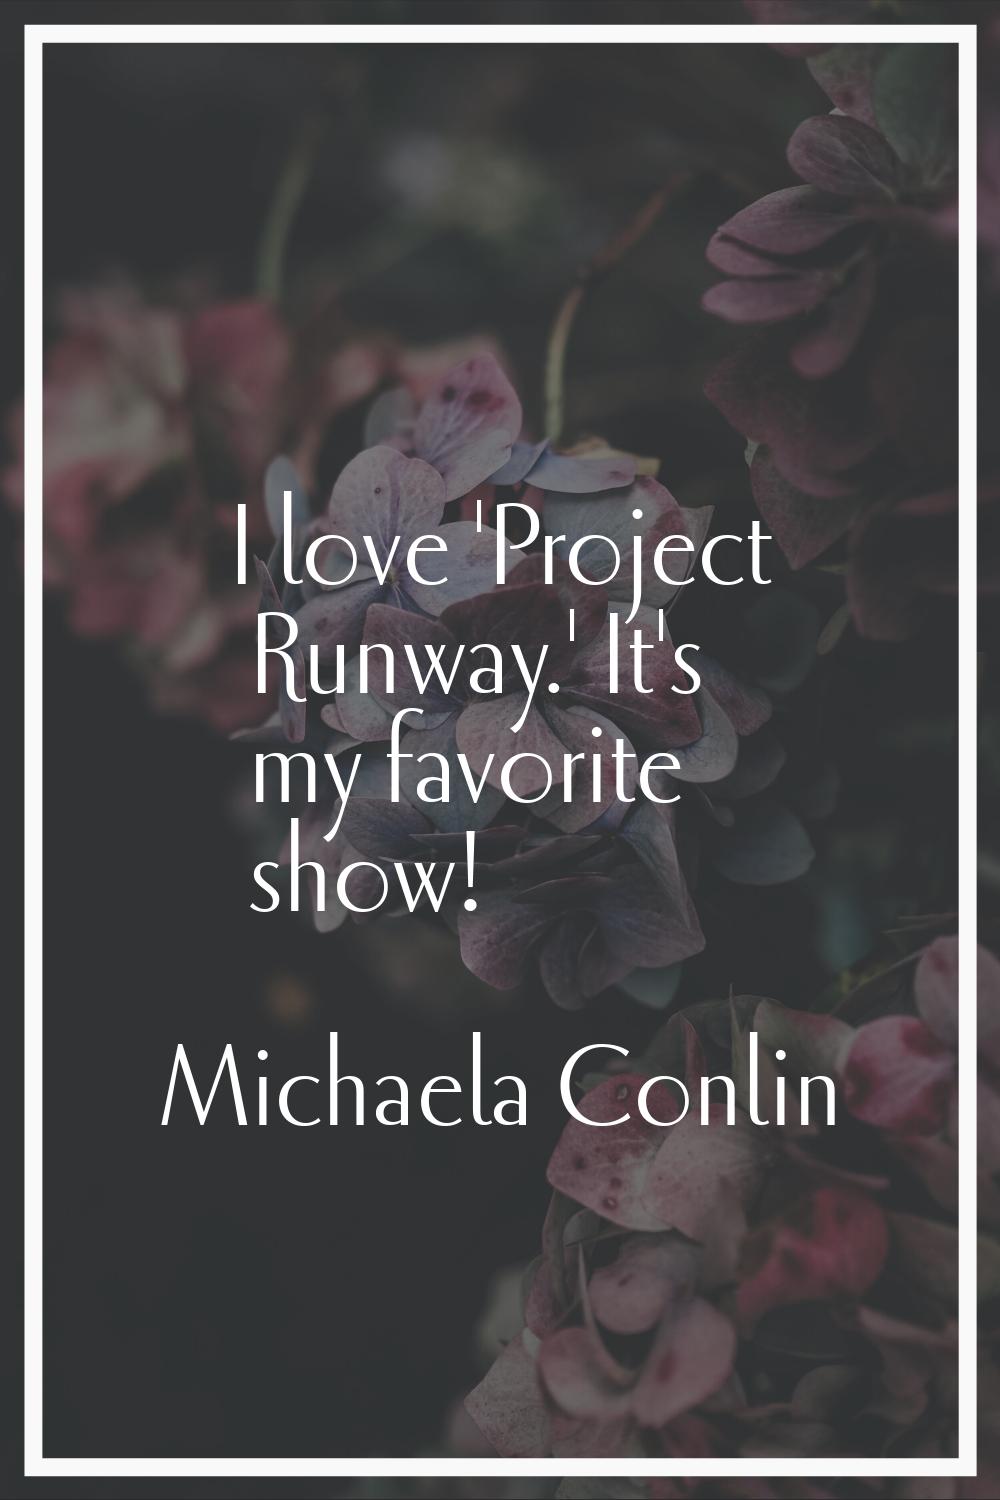 I love 'Project Runway.' It's my favorite show!